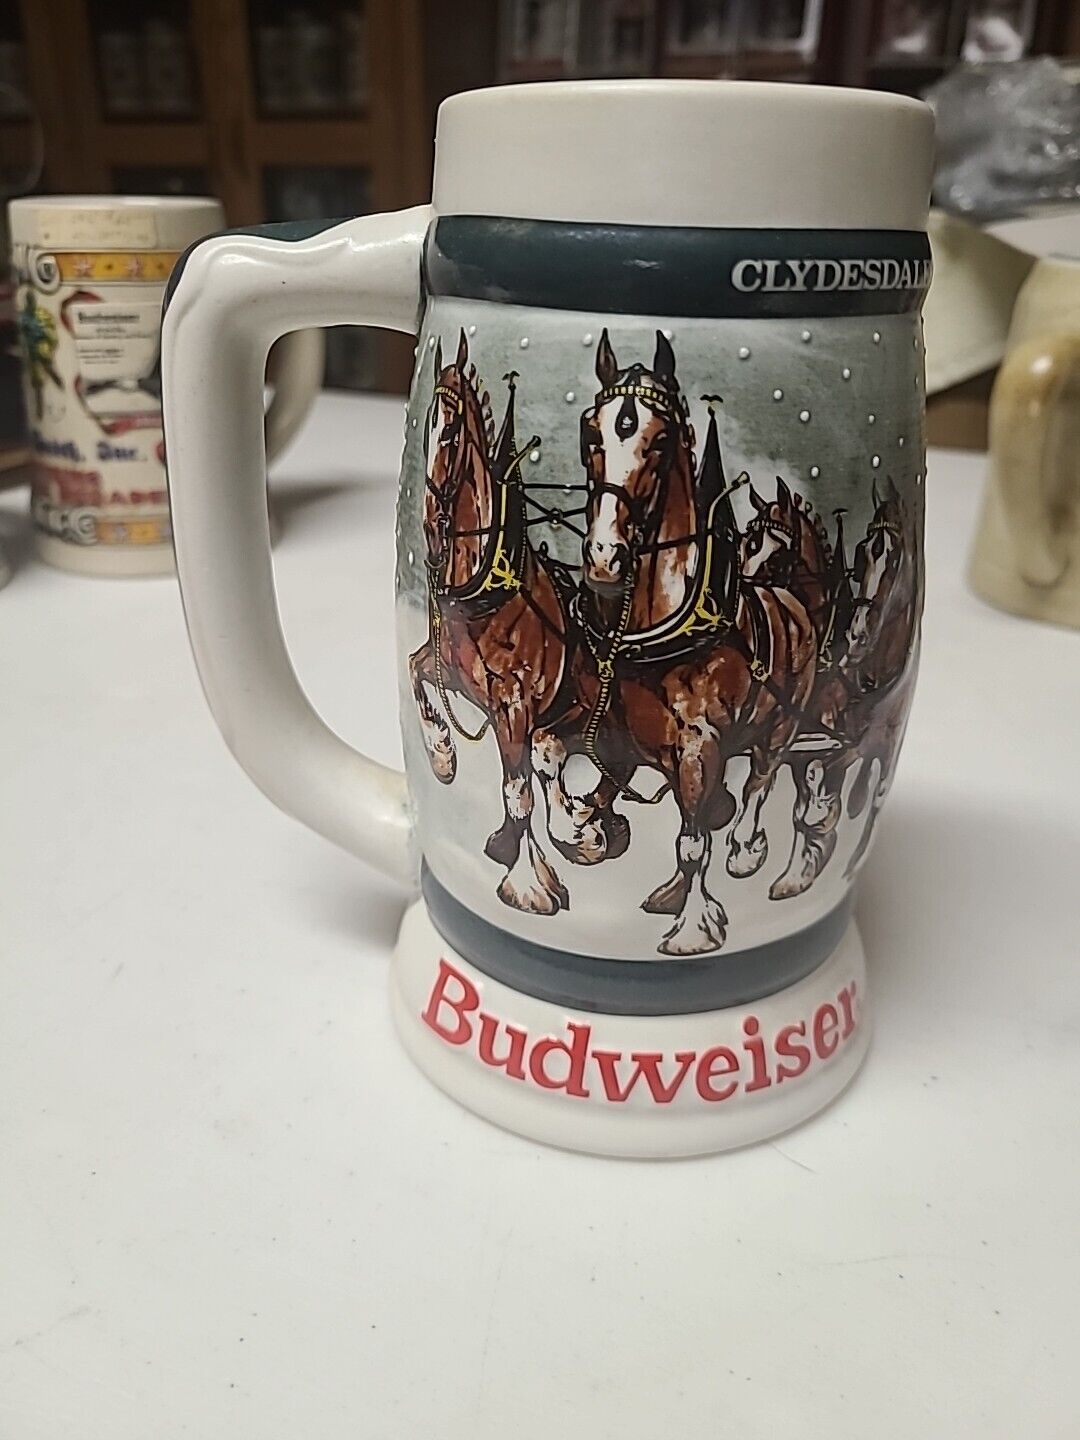 1982 Budweiser 50th Anniversary Clydesdale’s Holiday Beer Stein Mug